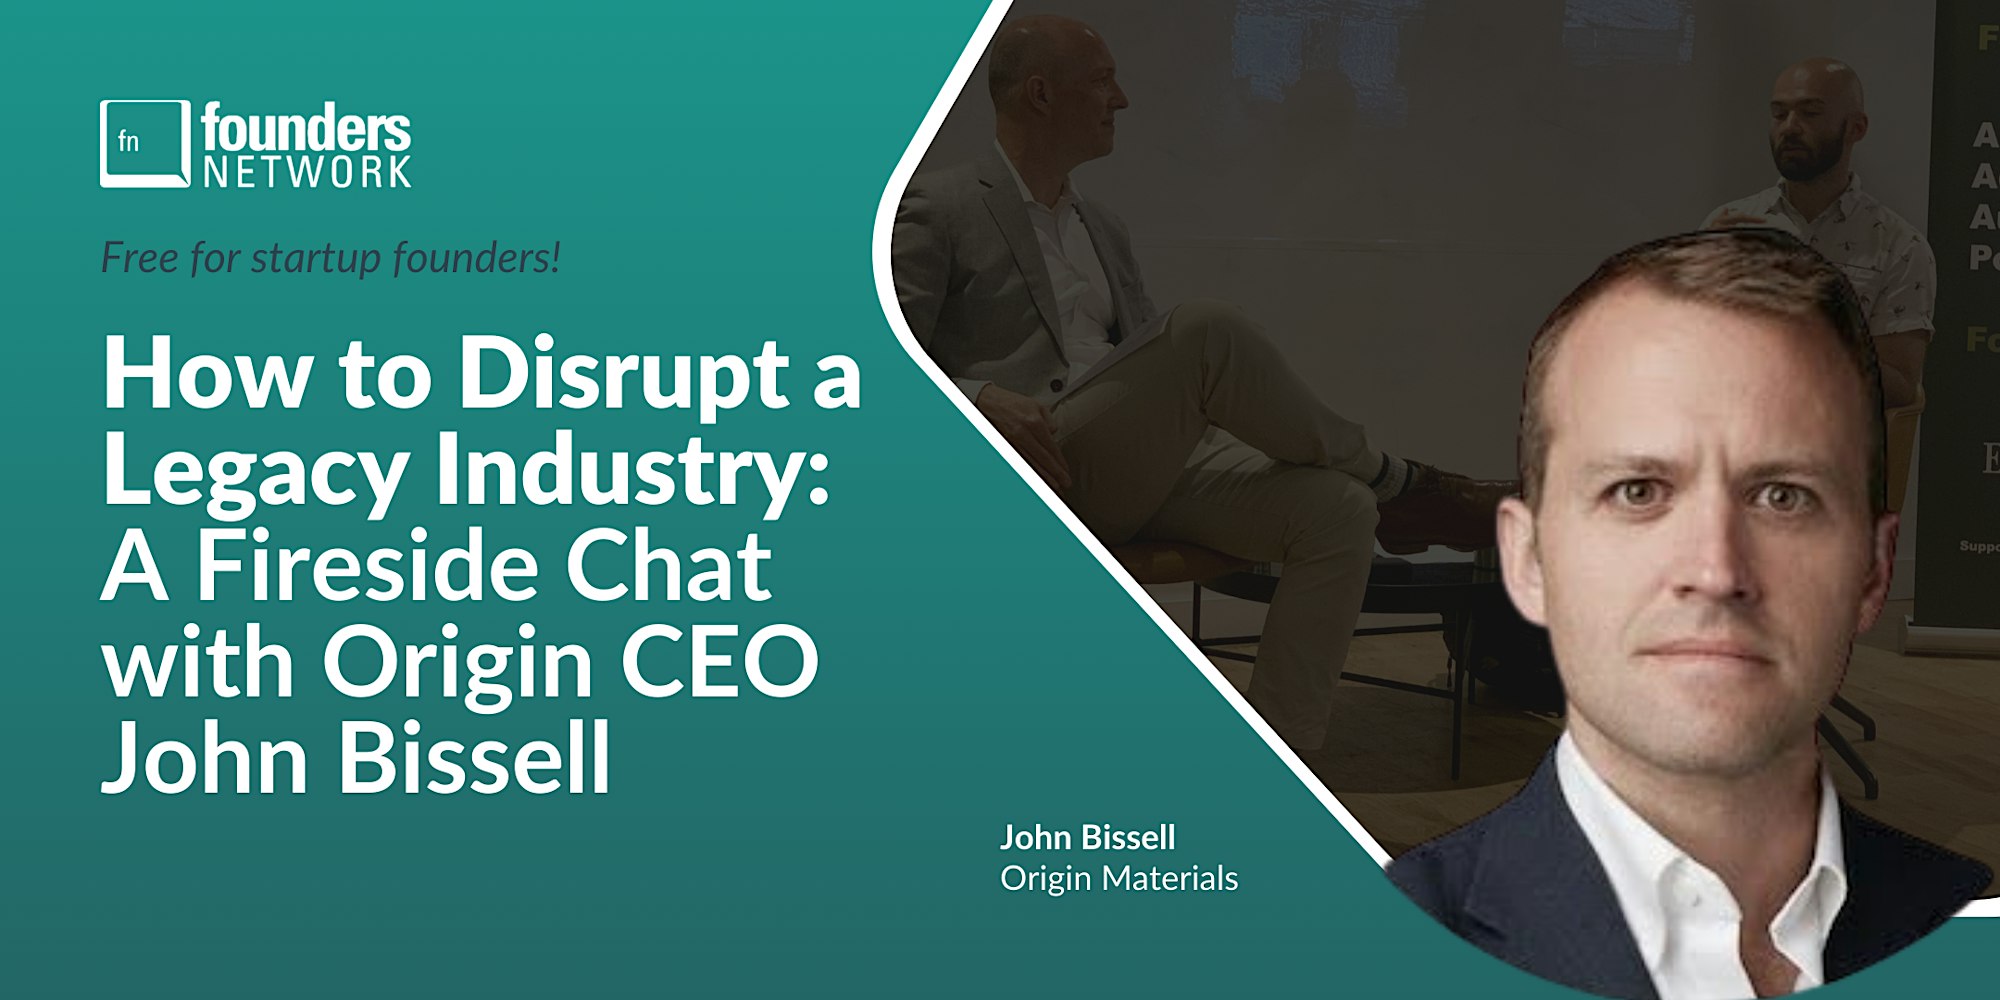 Featured image for “How to Disrupt a Legacy Industry: A Fireside Chat with John Bissell”